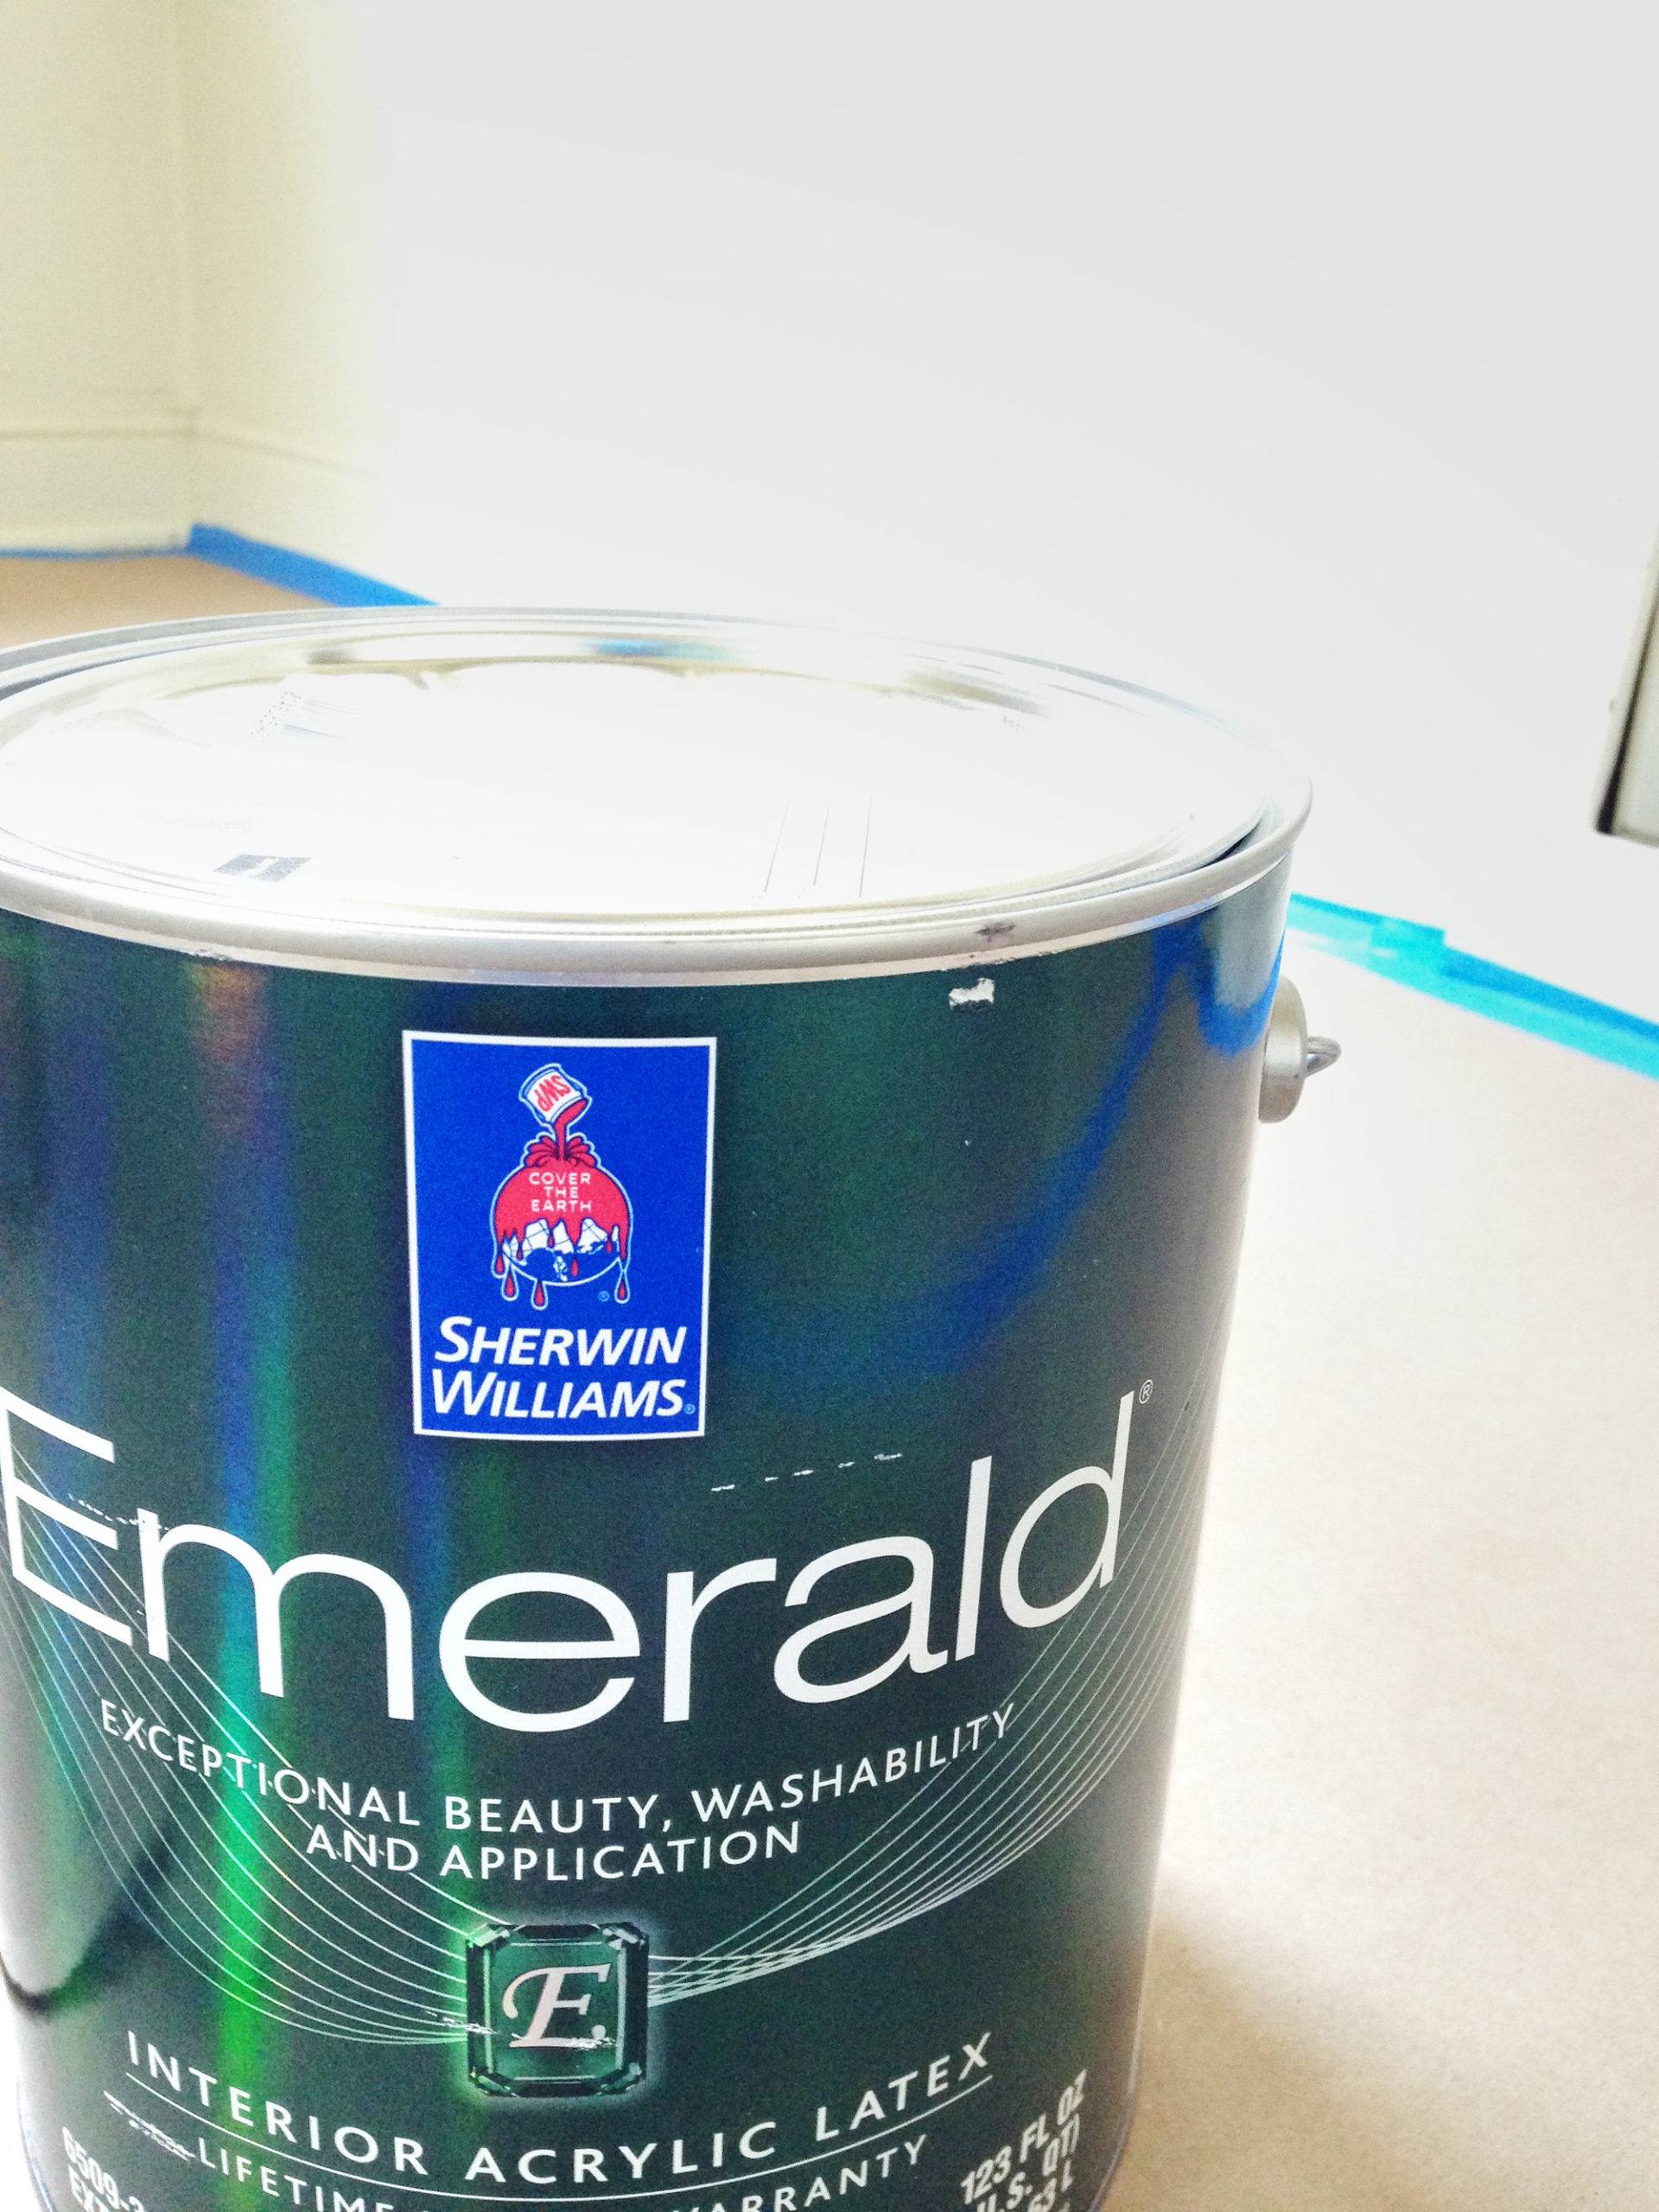 A can of Sherwin Williams Emerald interior acrylic latex paint.